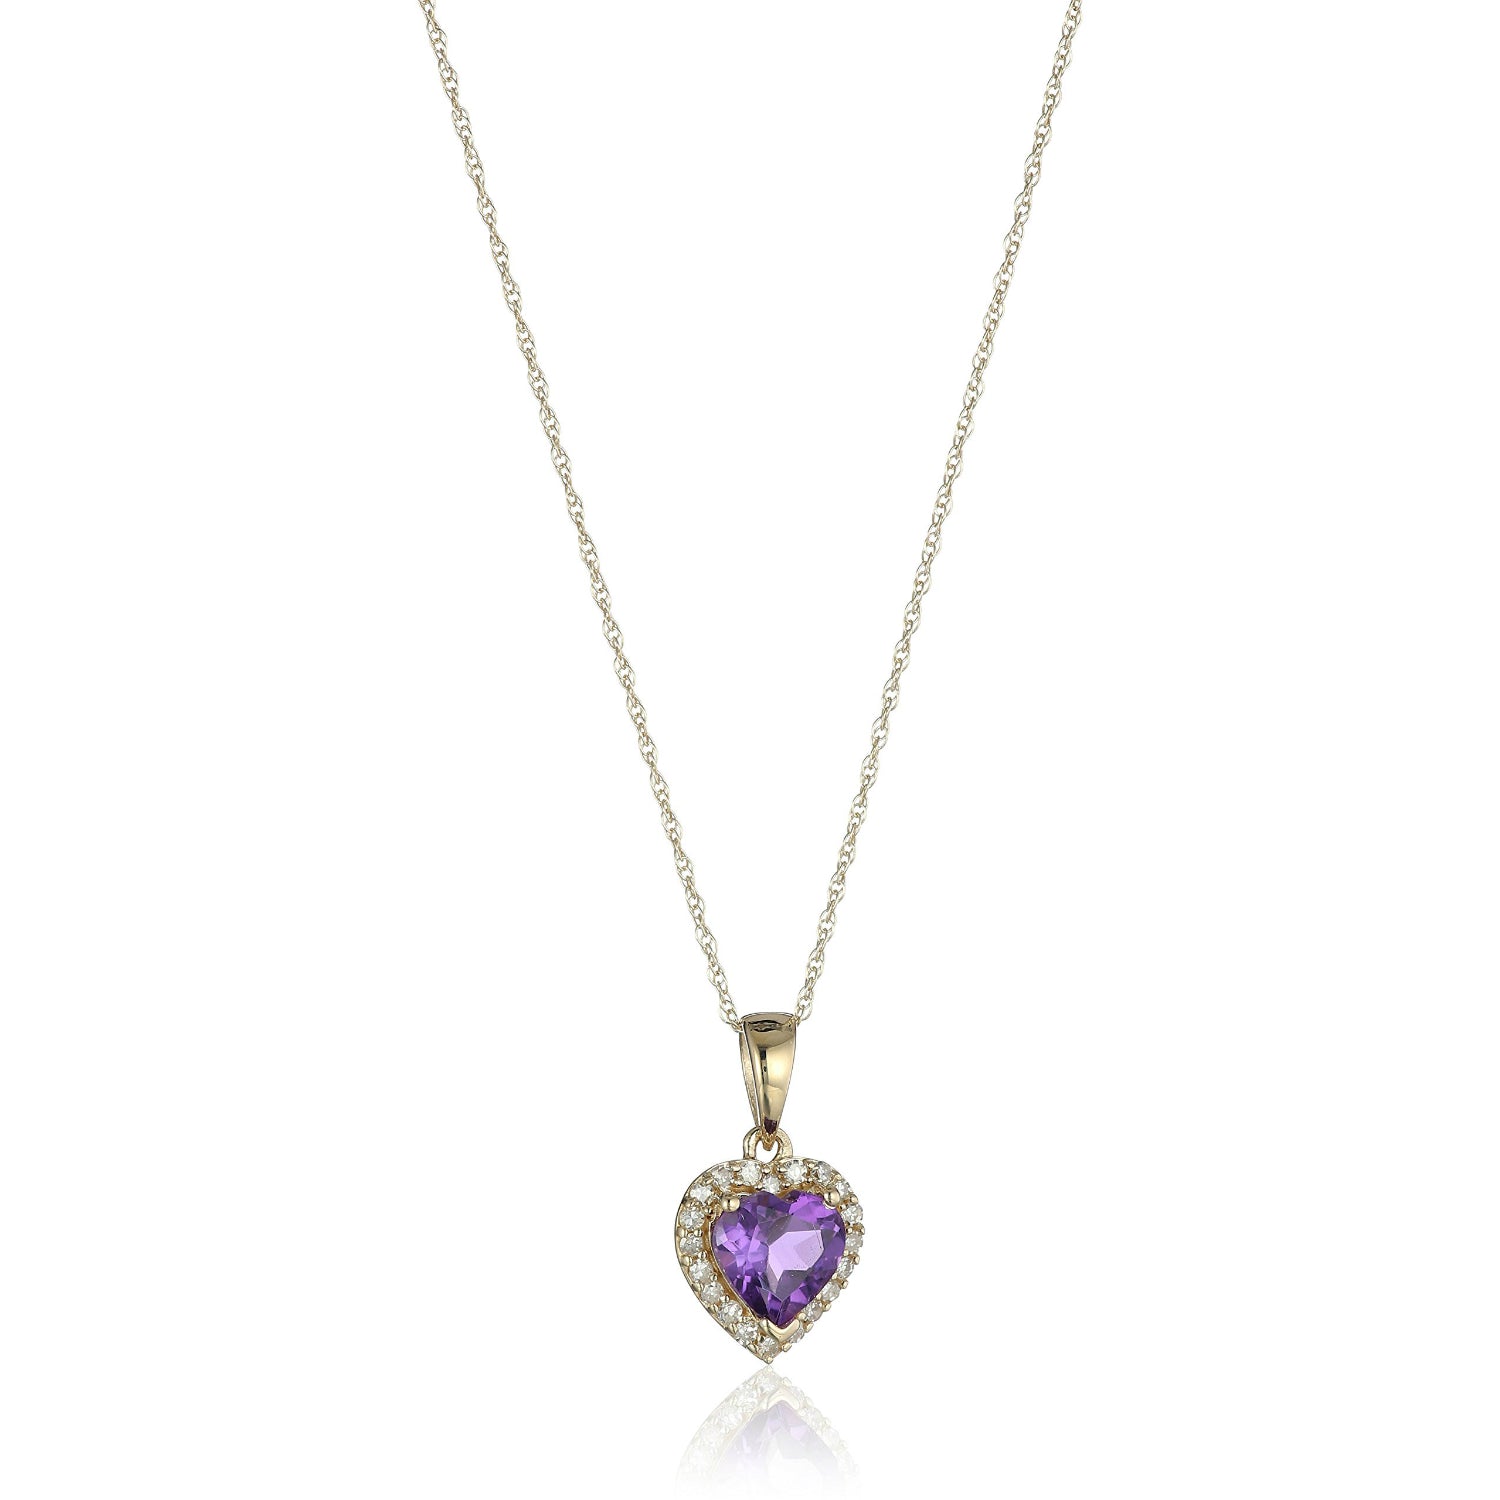 10k Yellow Gold African Amethyst Heart and Diamond Pendant Necklace, (1/10 cttw H-I Color, I1-I2 Clarity), 18" - pinctore